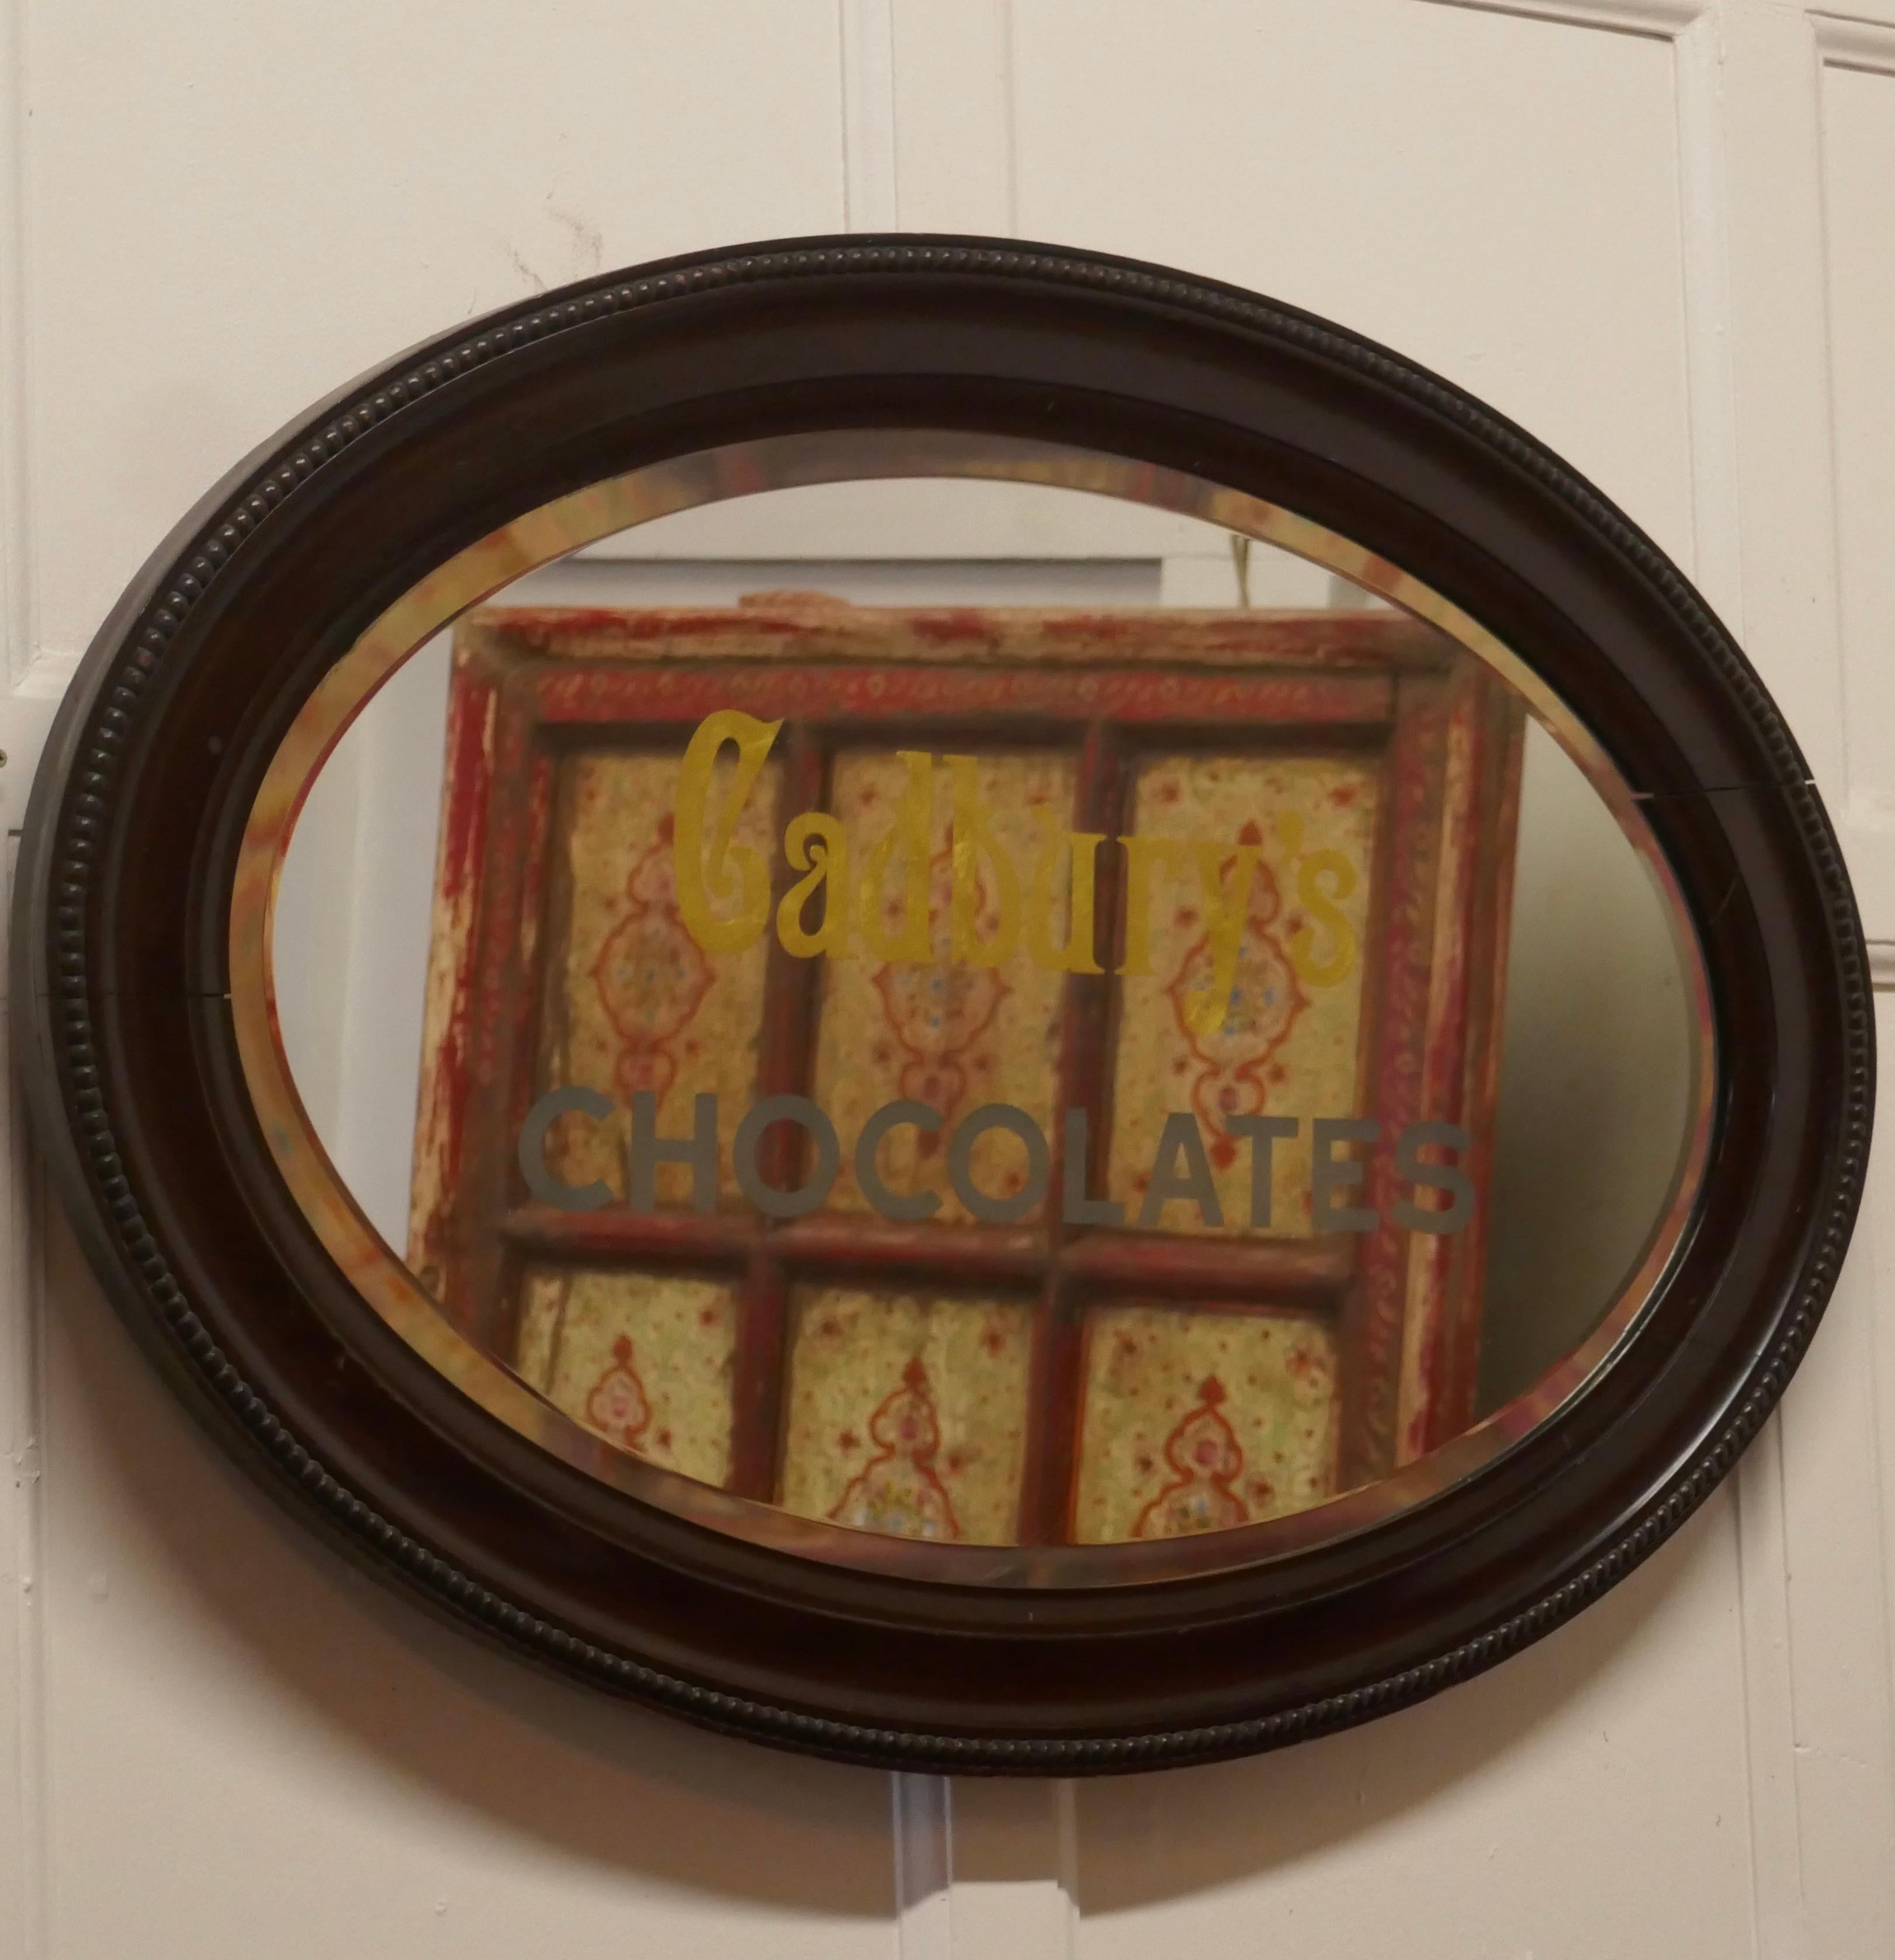 Edwardian Cadbury’s Chocolates Advertising Mirror

This piece is in very good condition, it comes in its 3” Oval frame, the mirror is etched and painted on the reverse side 
The Mirror is in very good condition, the frame has some shrinkage, it